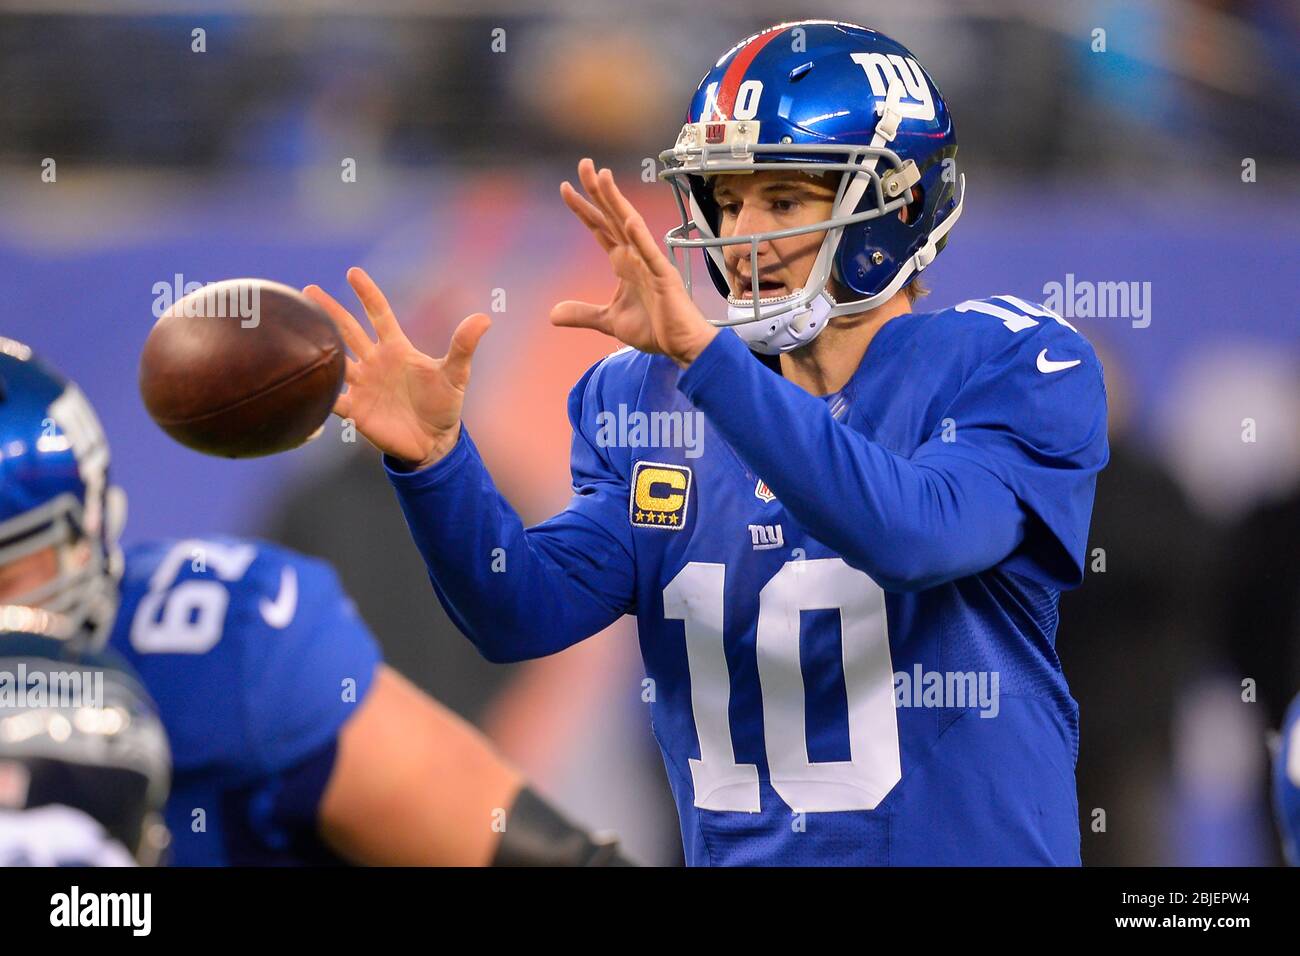 December 15, 2013: New York Giants quarterback Eli Manning (10) during the second half of a NFL game between the Seattle Seahawks and the New York Gia Stock Photo